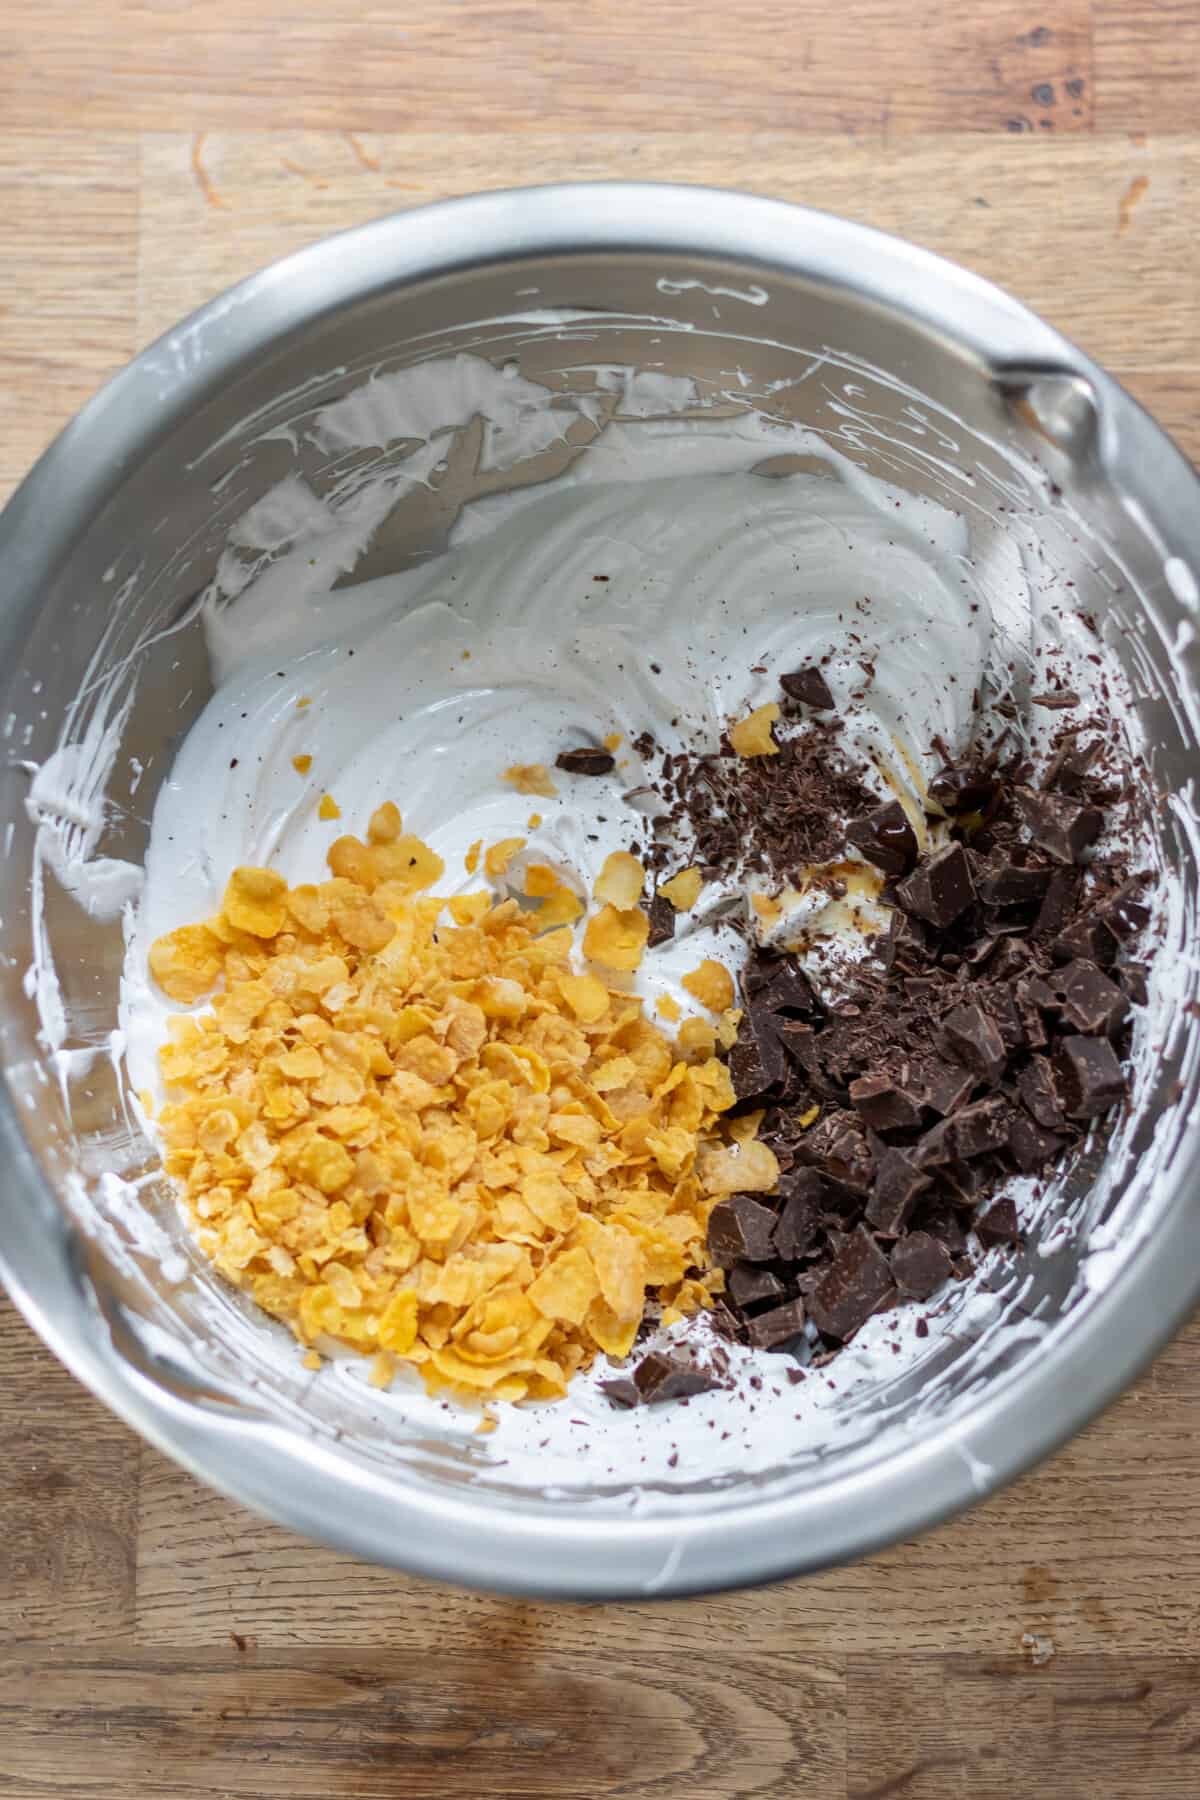 Cornflakes and chopped dark chocolate added to the meringue mixture.